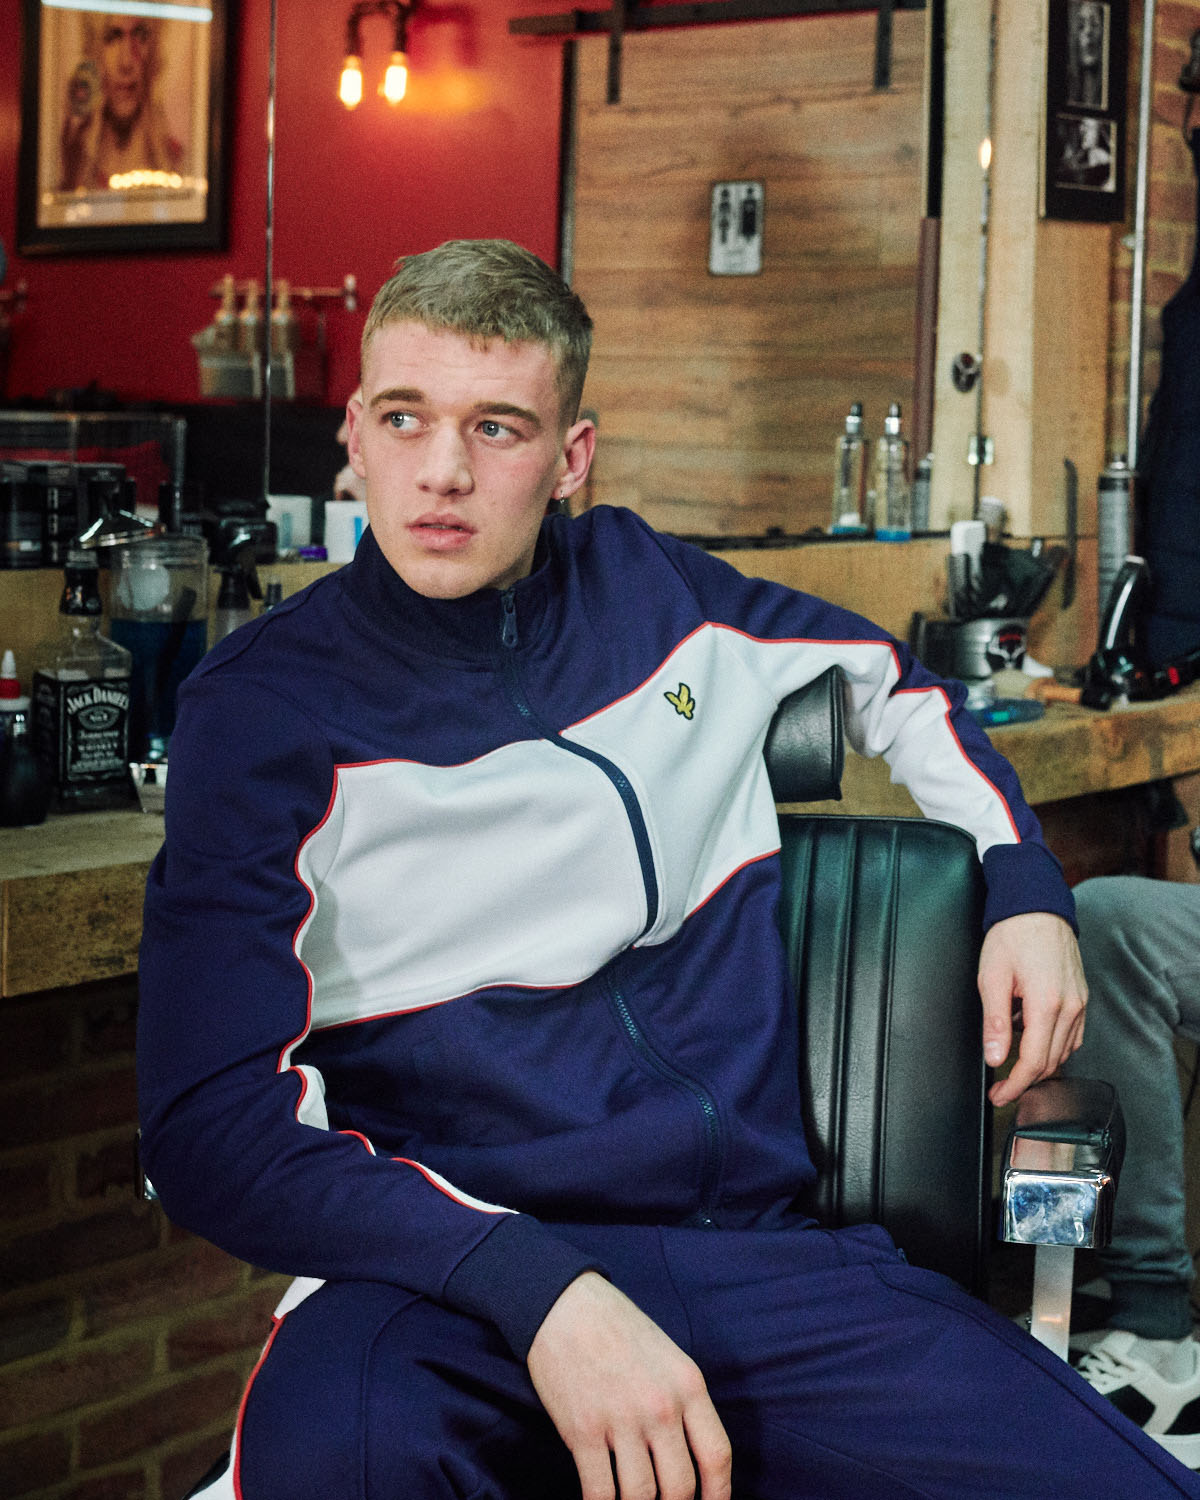 Lad in barbershop by lifestyle photographer Tim Cole